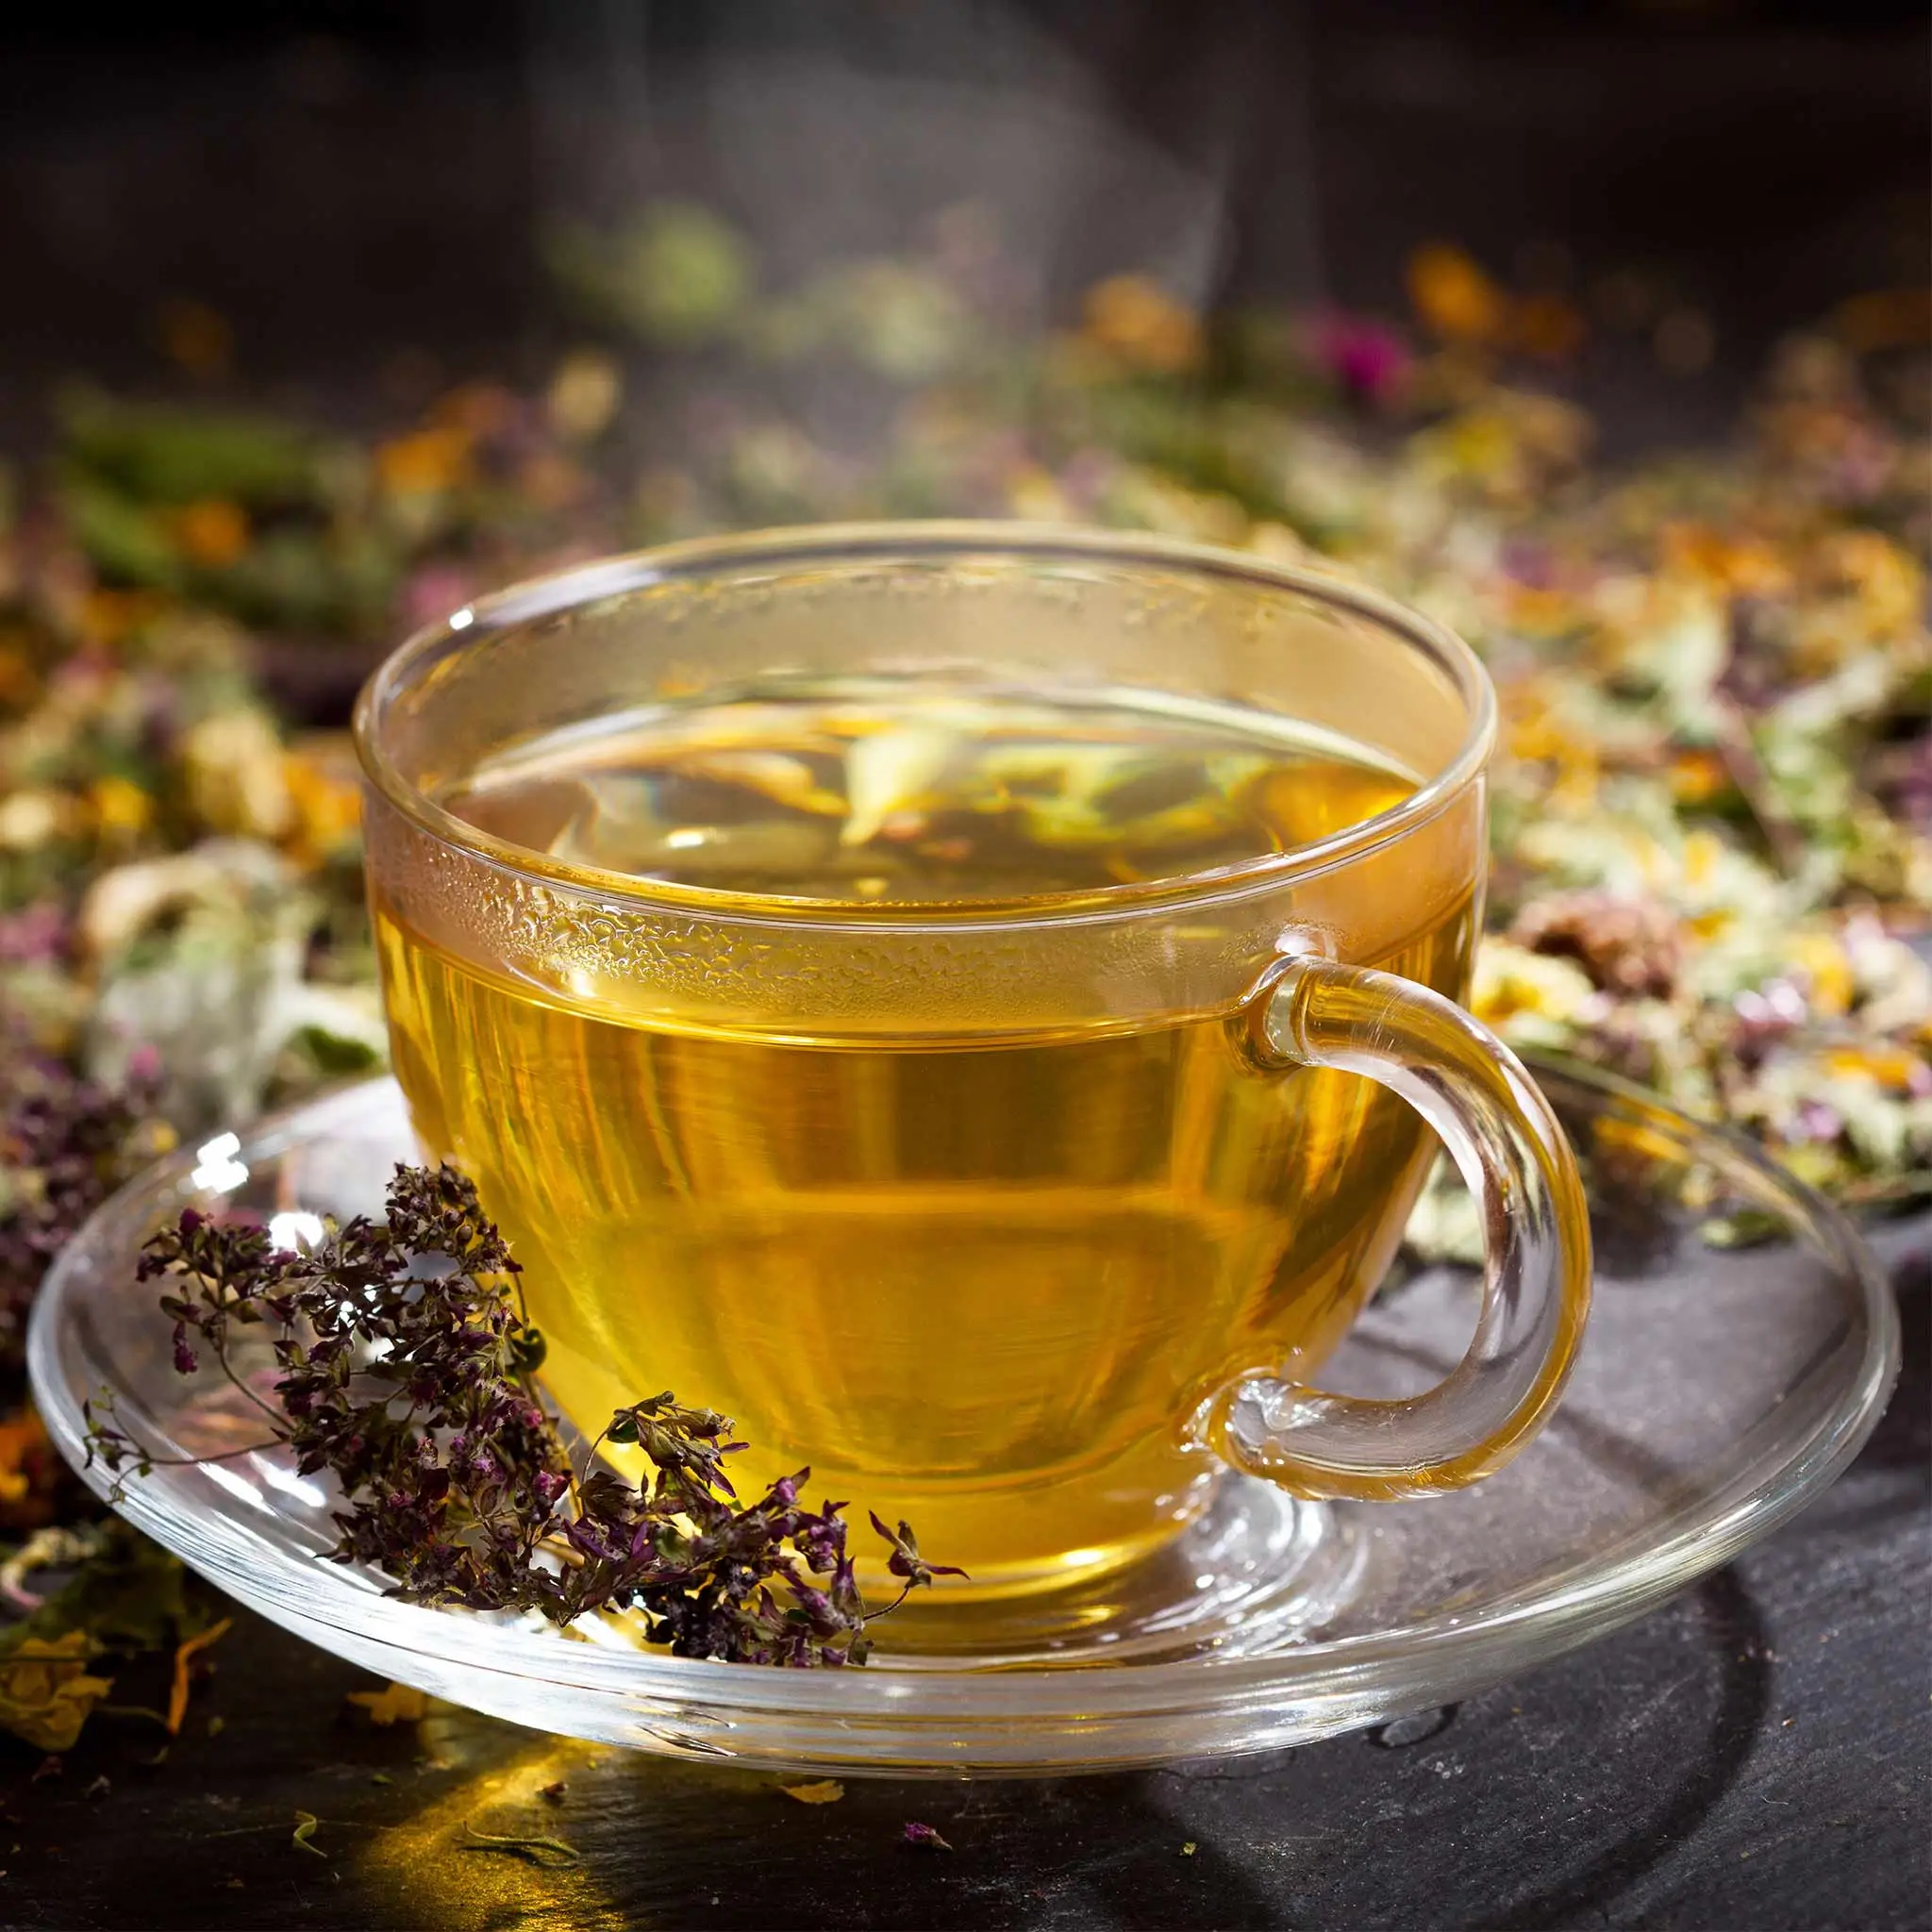 Cup of herbal tea with various herbs on a dark background